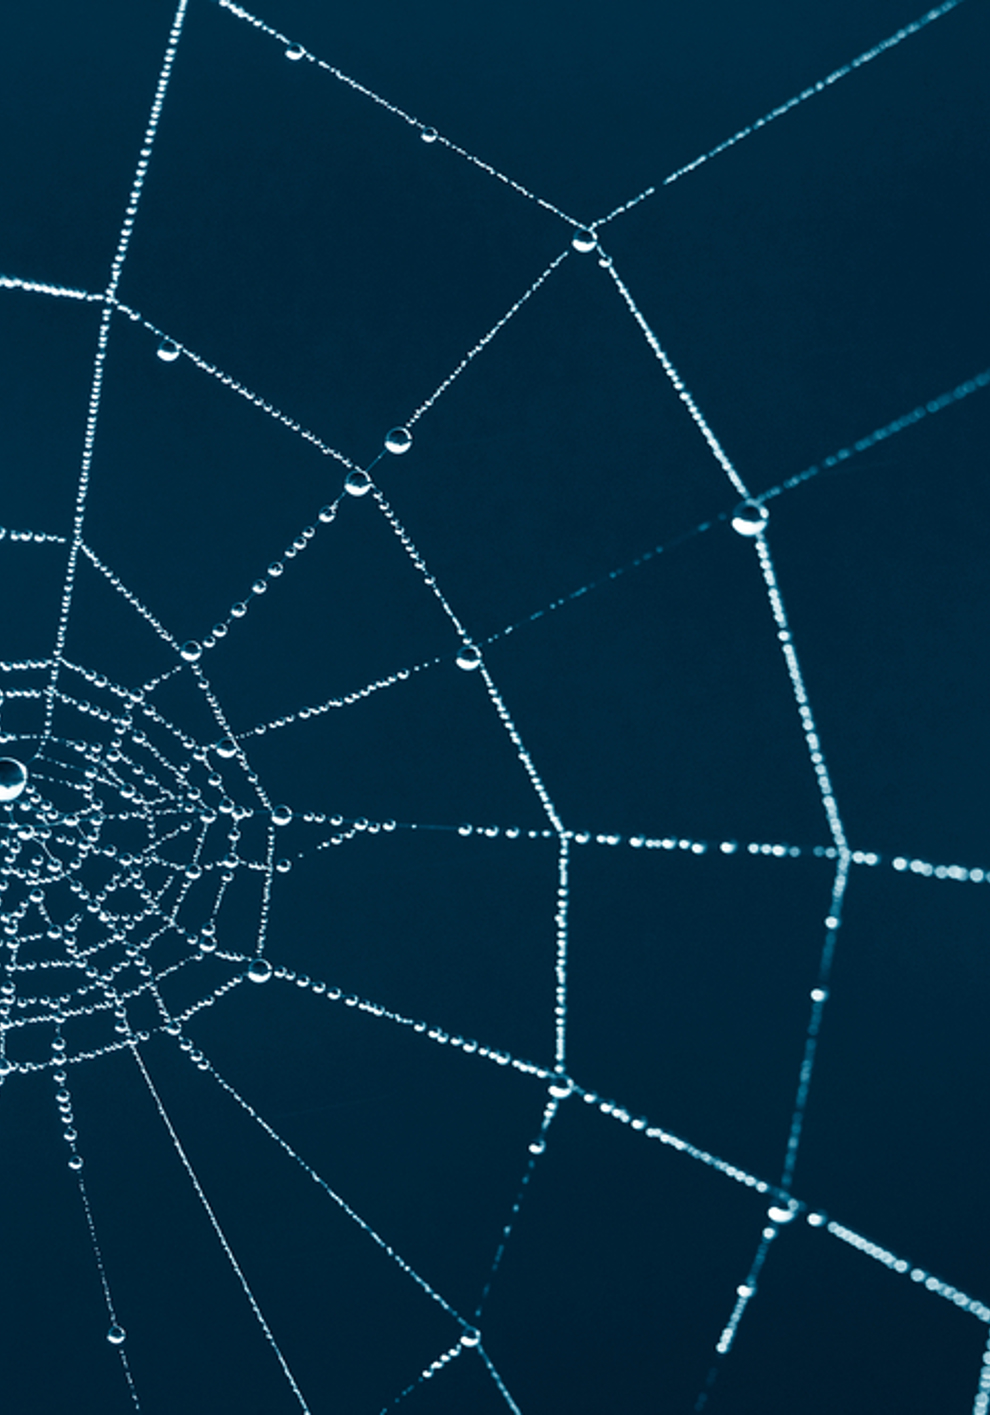 A tangled web: geopolitics, economic security and trade